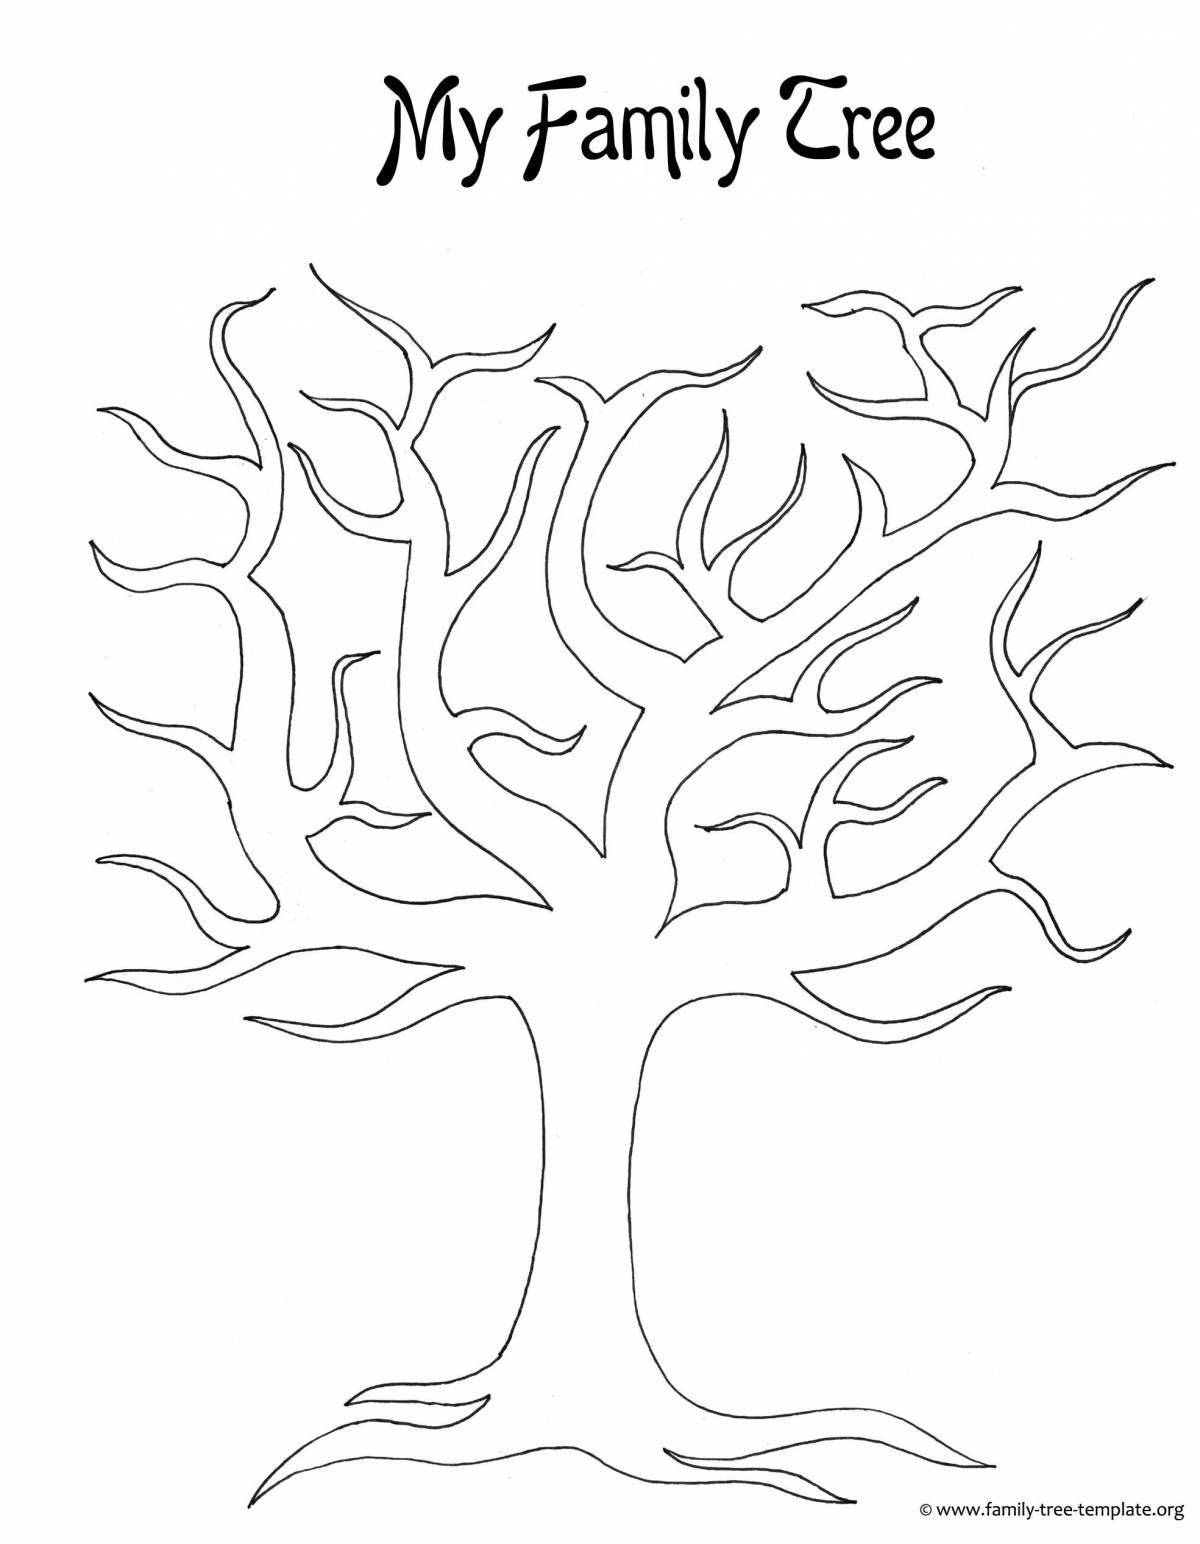 Impressive family tree template to fill out